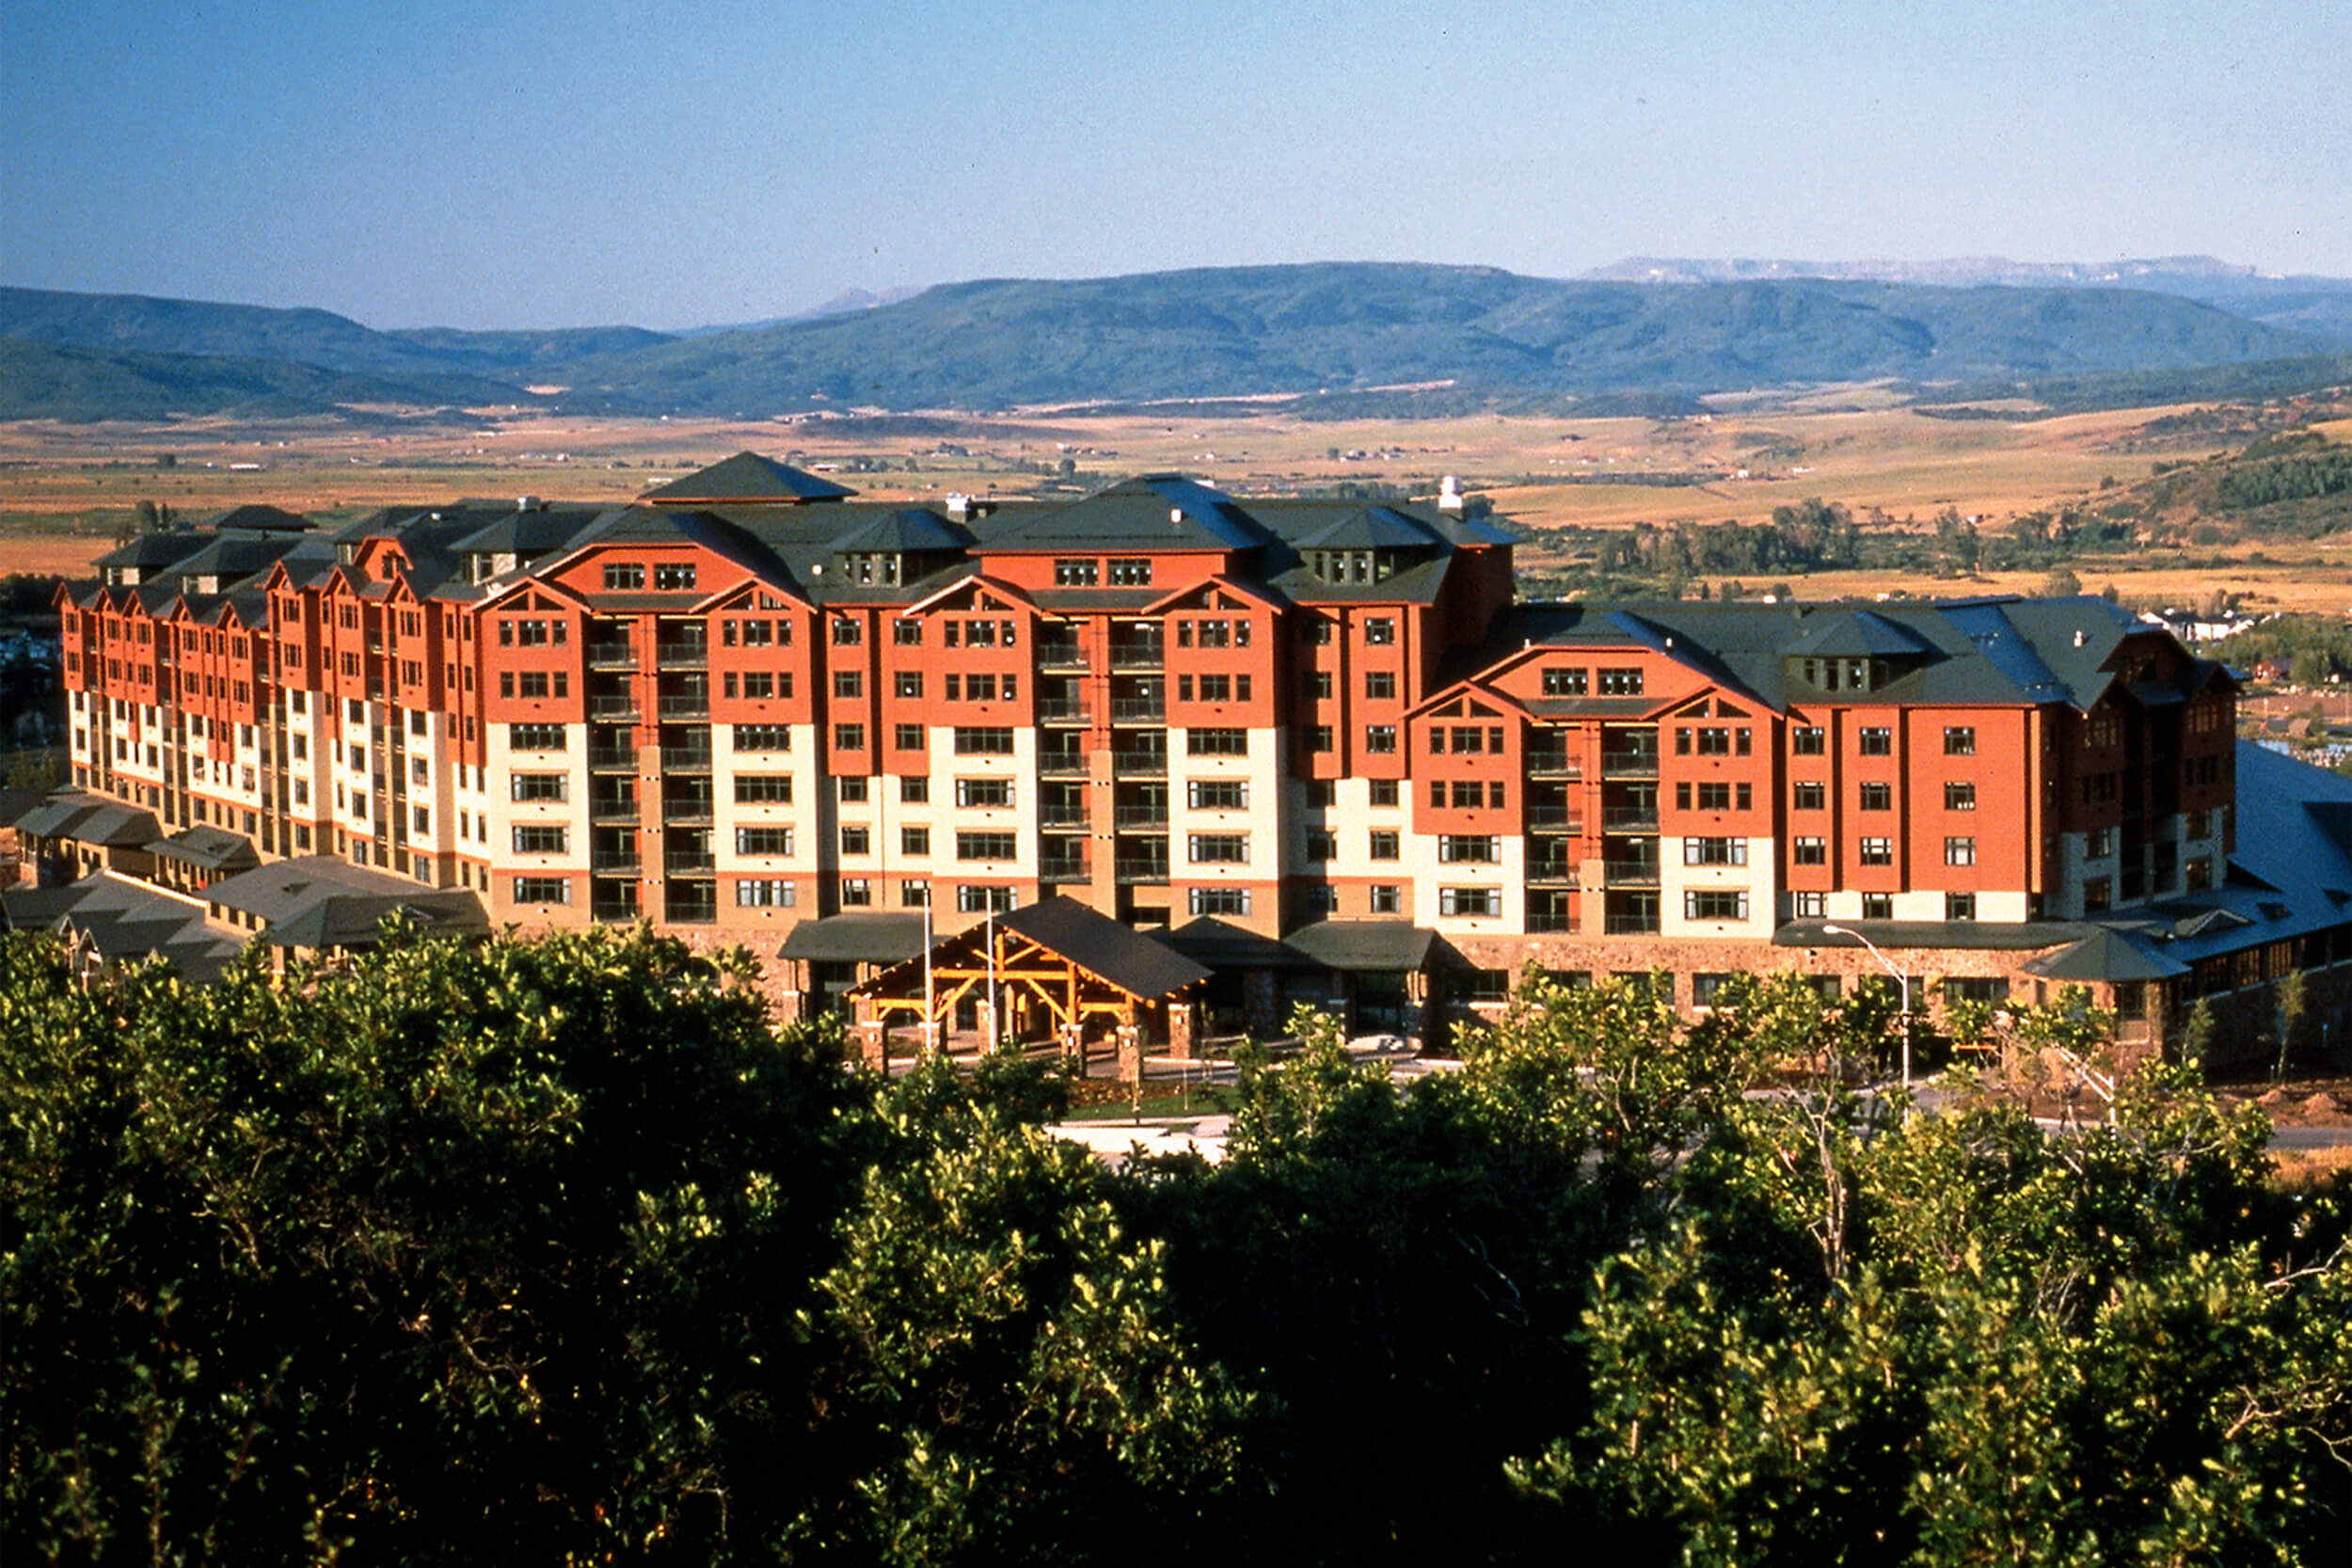 Exterior daytime view of a ski resort with mountains in the background. The multi-unit building has a brown and white facade.